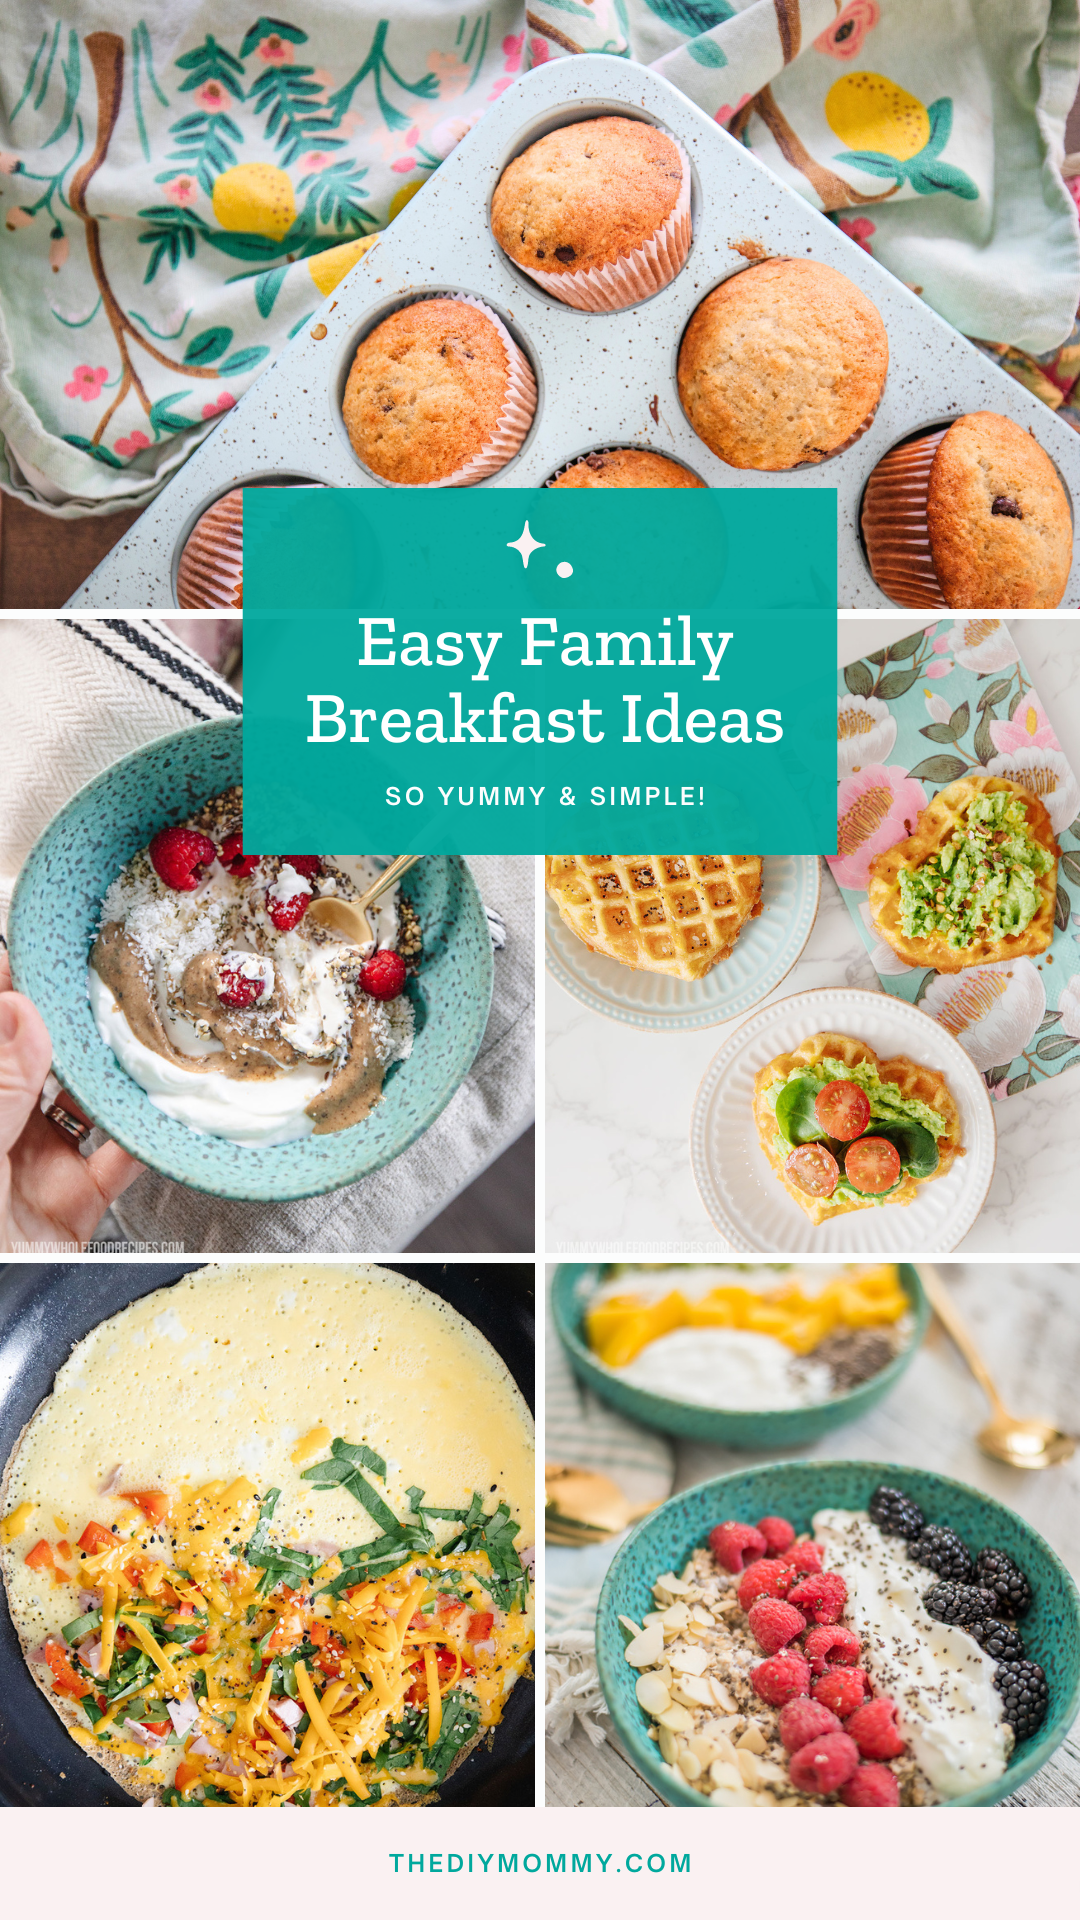 17 Easy Family Breakfast Ideas for a Yummy & Relaxed Morning